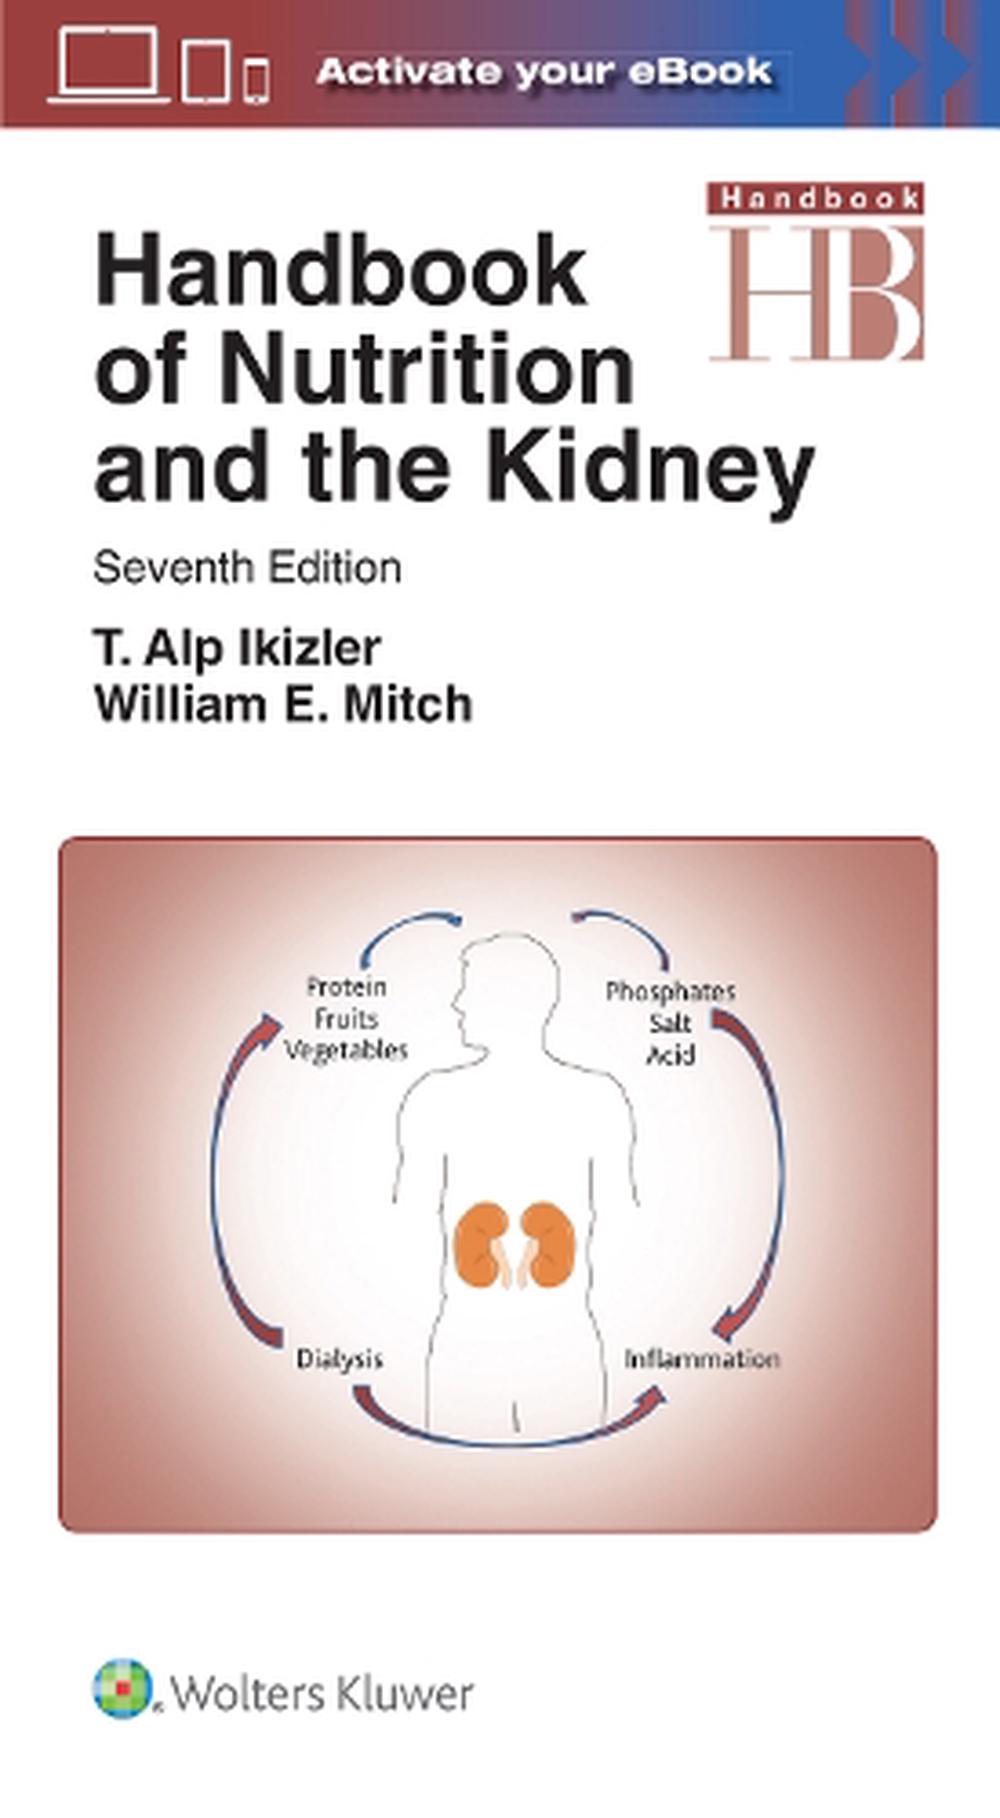 Handbook of Nutrition and the Kidney by Mitch (English) Paperback Book Free Ship 9781496355812